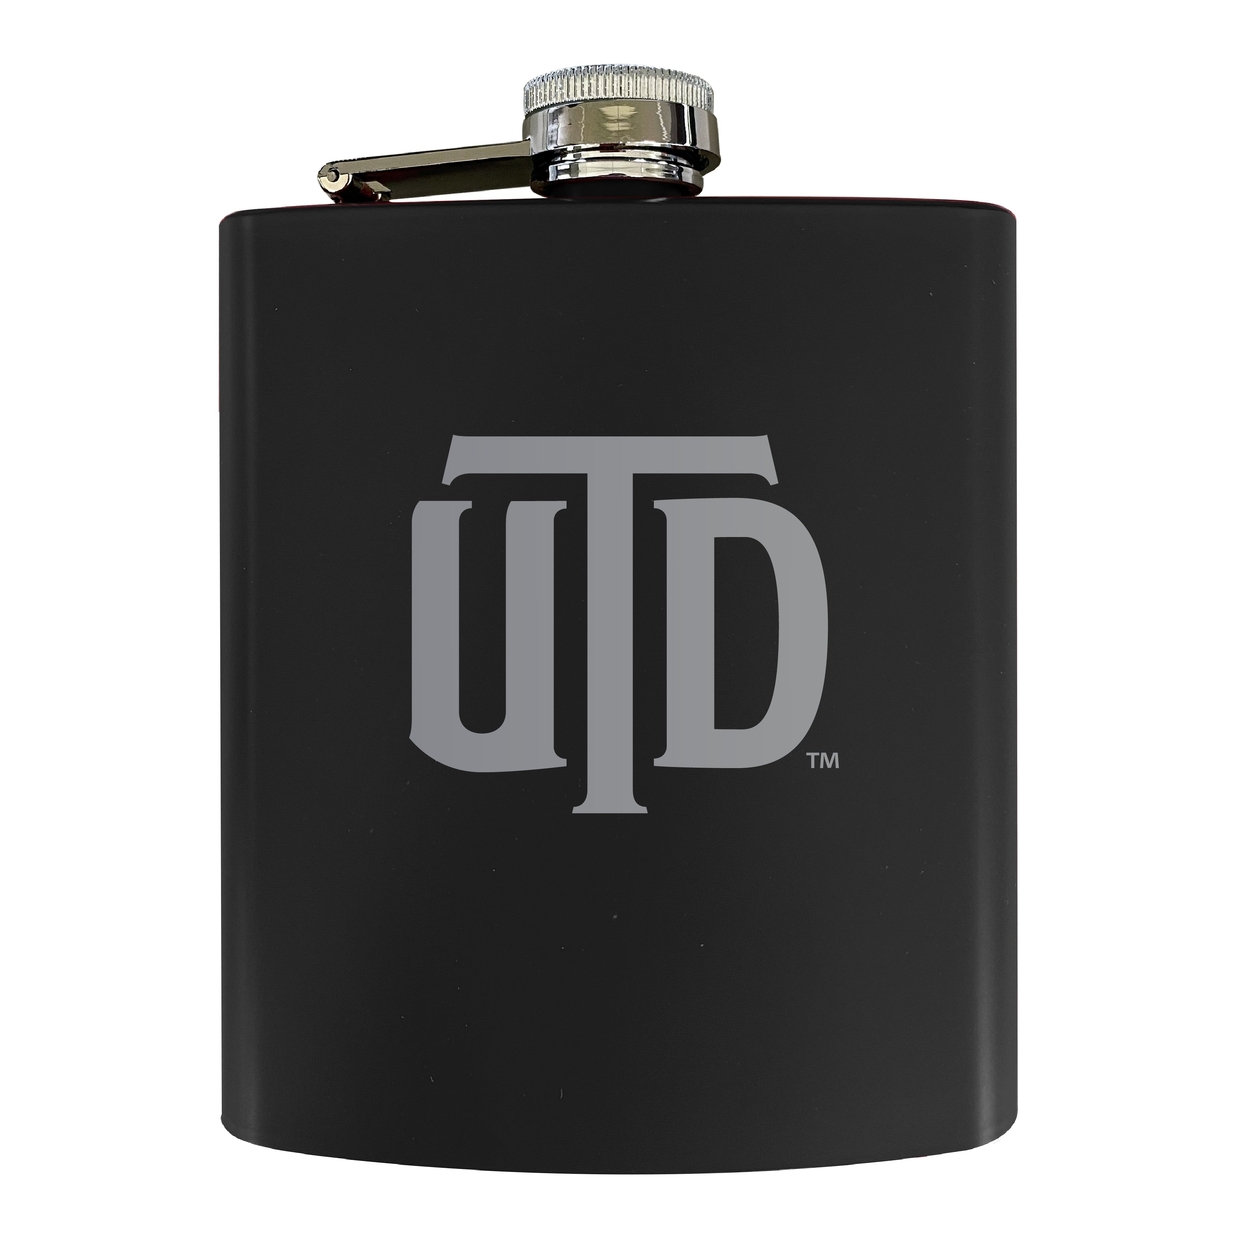 University Of Texas At Dallas Stainless Steel Etched Flask - Choose Your Color - Black